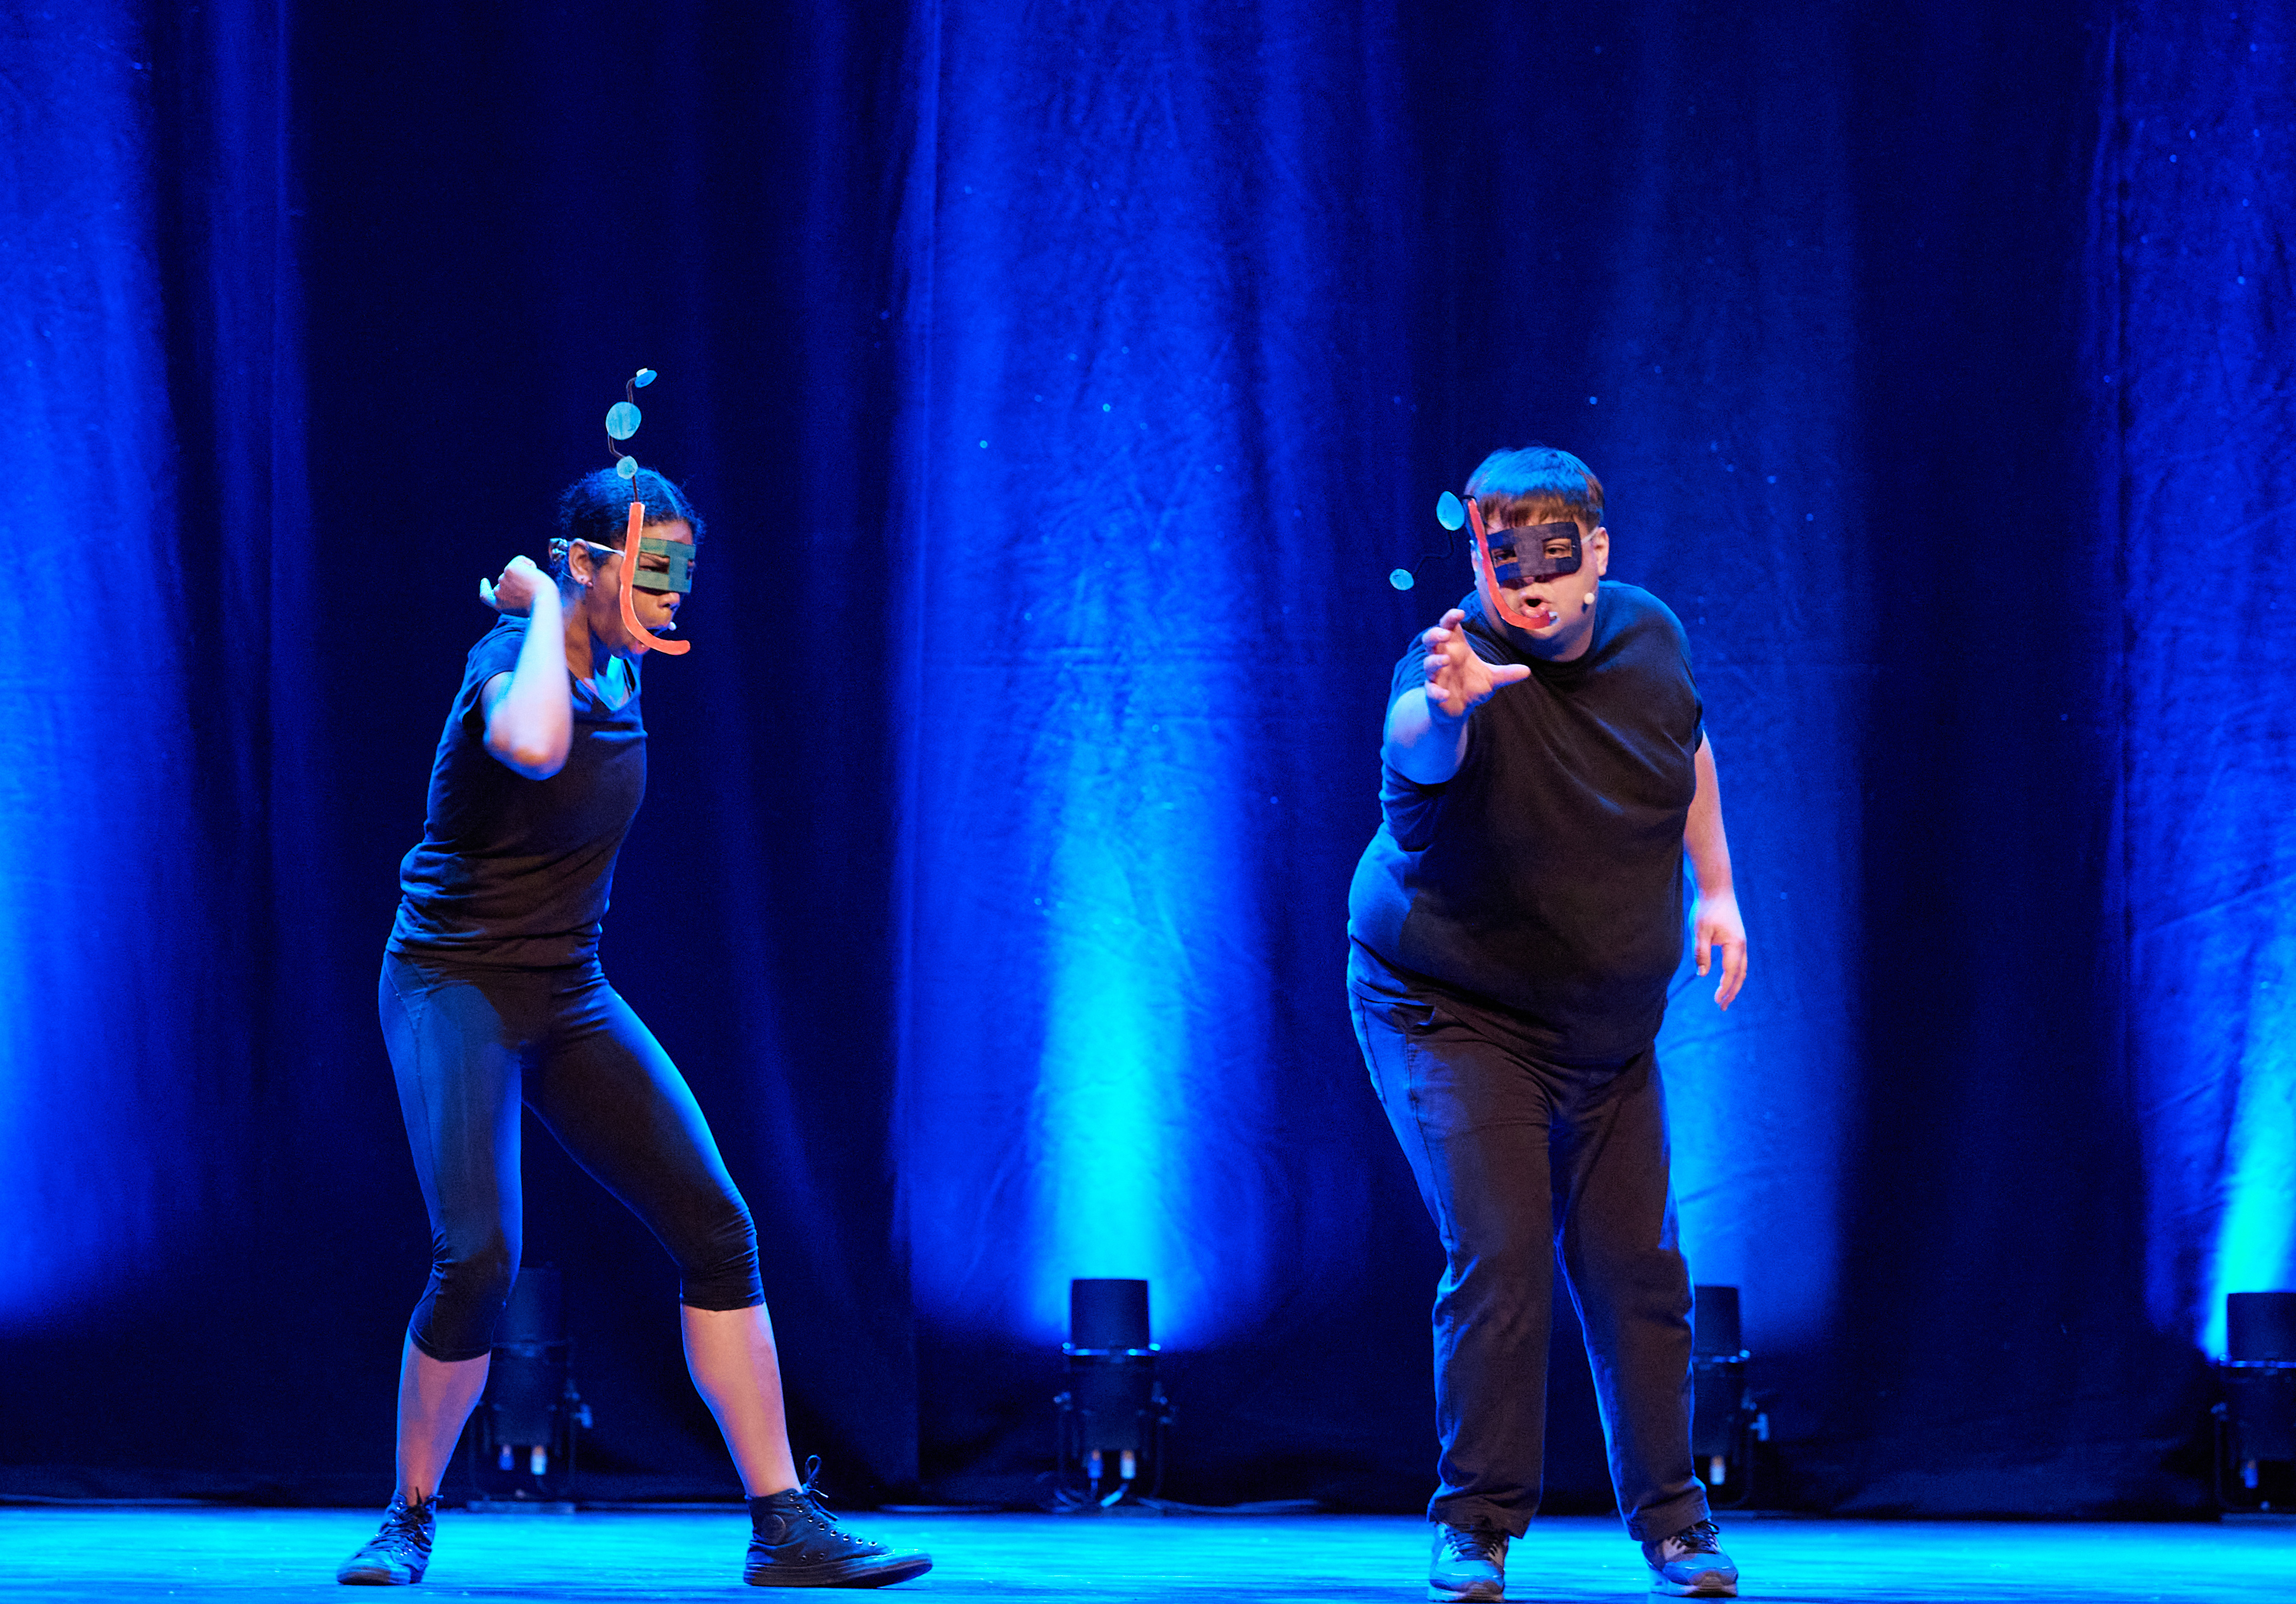 Two actors stand on stage, pretending they are scuba diving. They both wear makeshift snorkels with cardboard bubbles coming out of the top. The stage is lit up in bright blue.